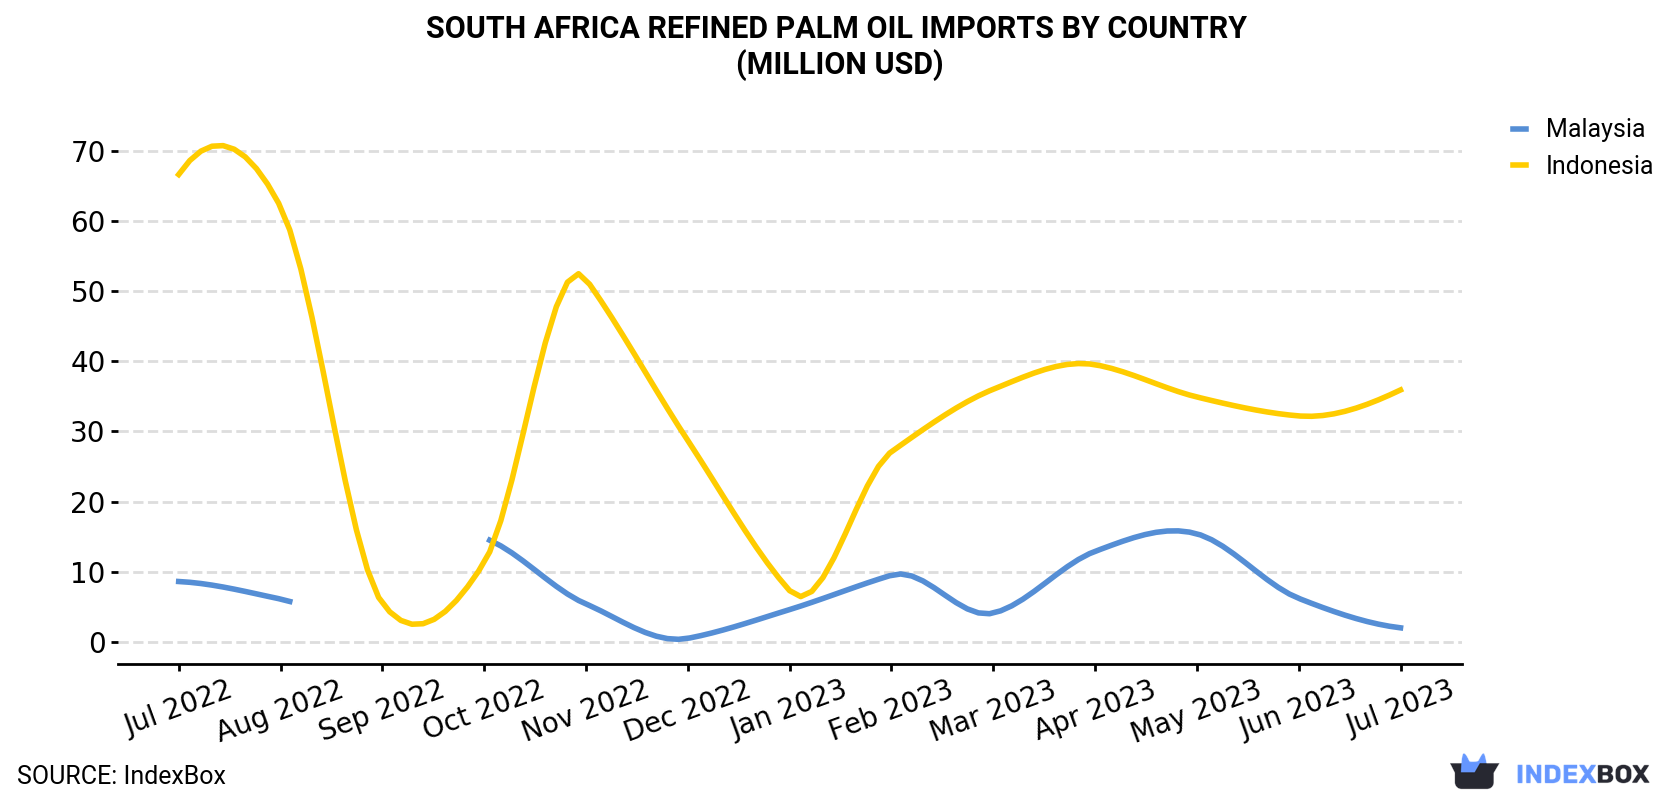 South Africa Refined Palm Oil Imports By Country (Million USD)